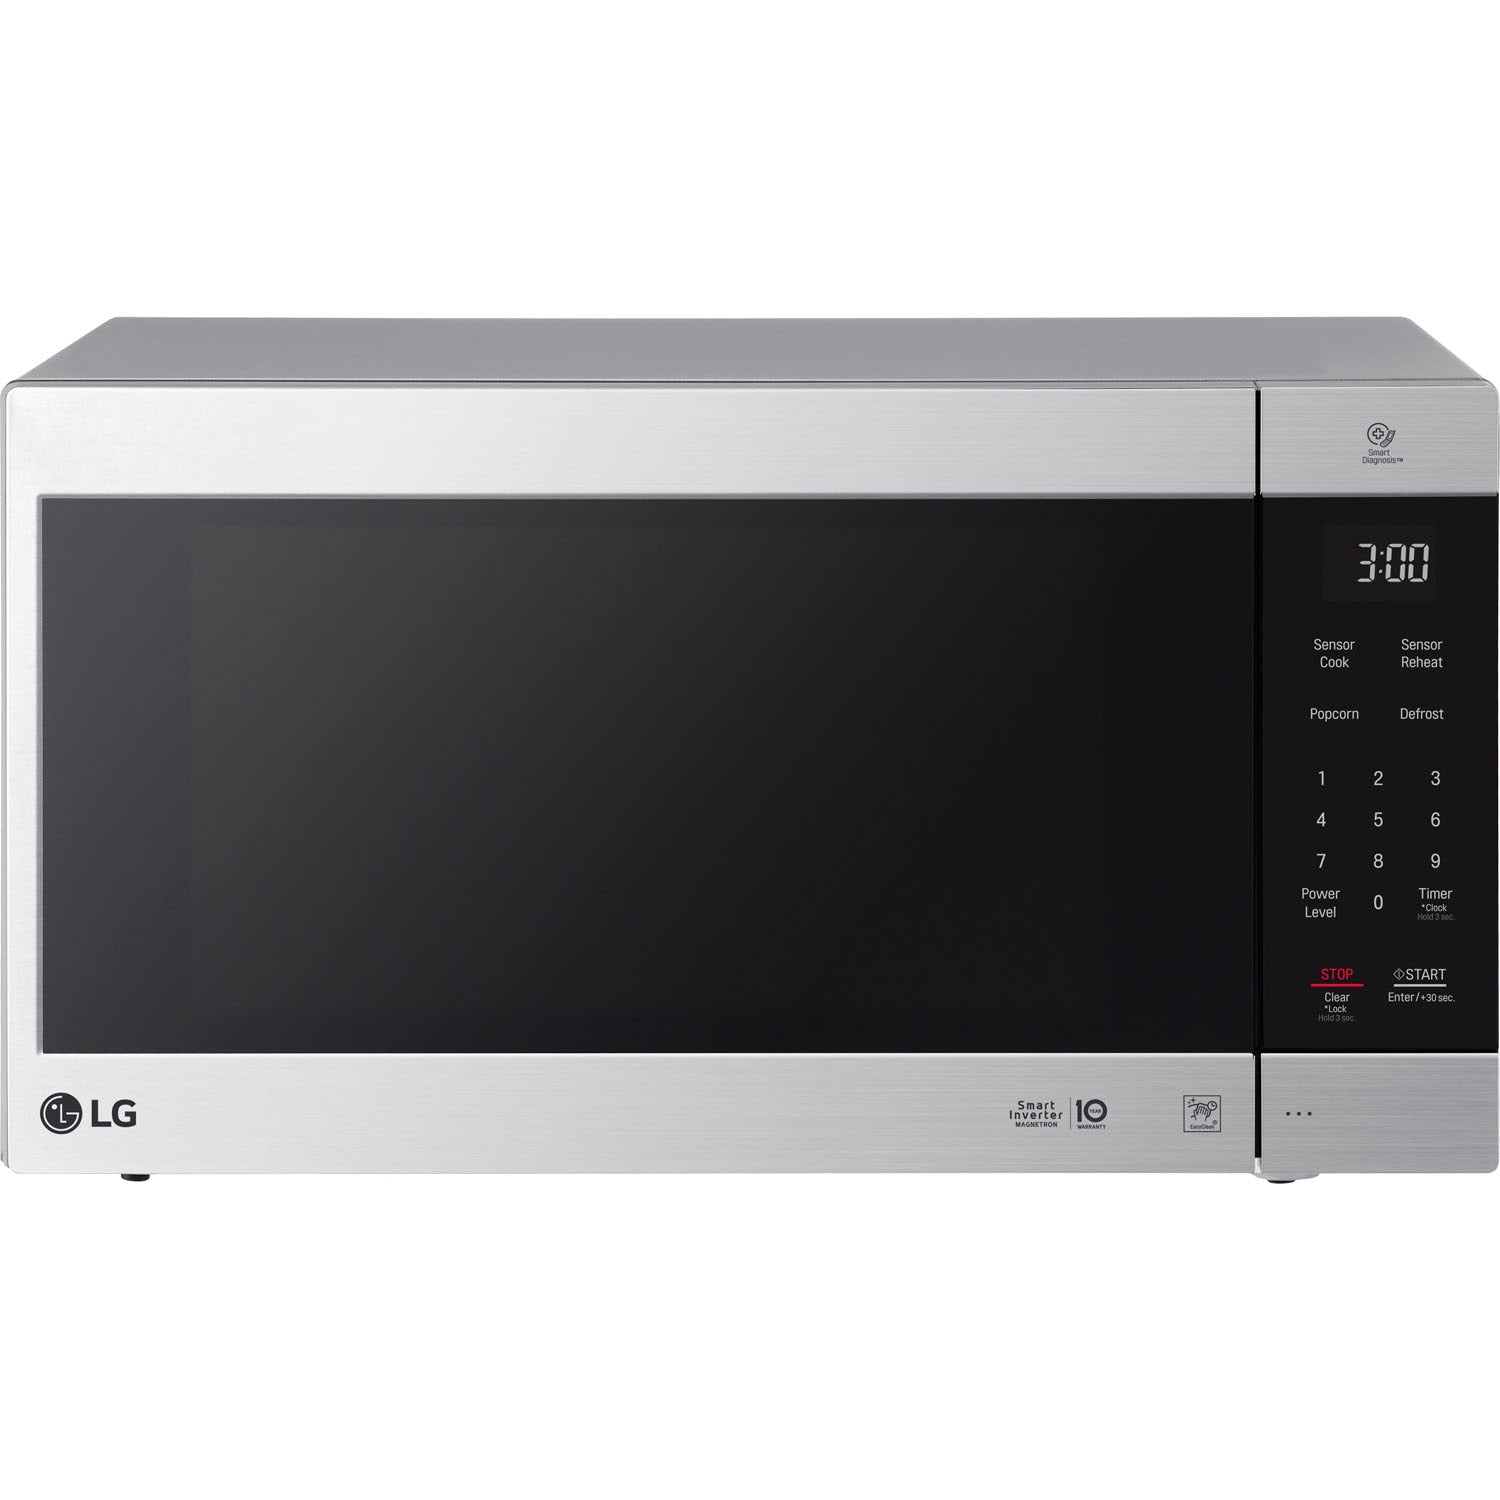 LG NeoChef 2 Cu. Ft. 1200W 24 in. Countertop Microwave in Stainless Steel (LMC2075ST)